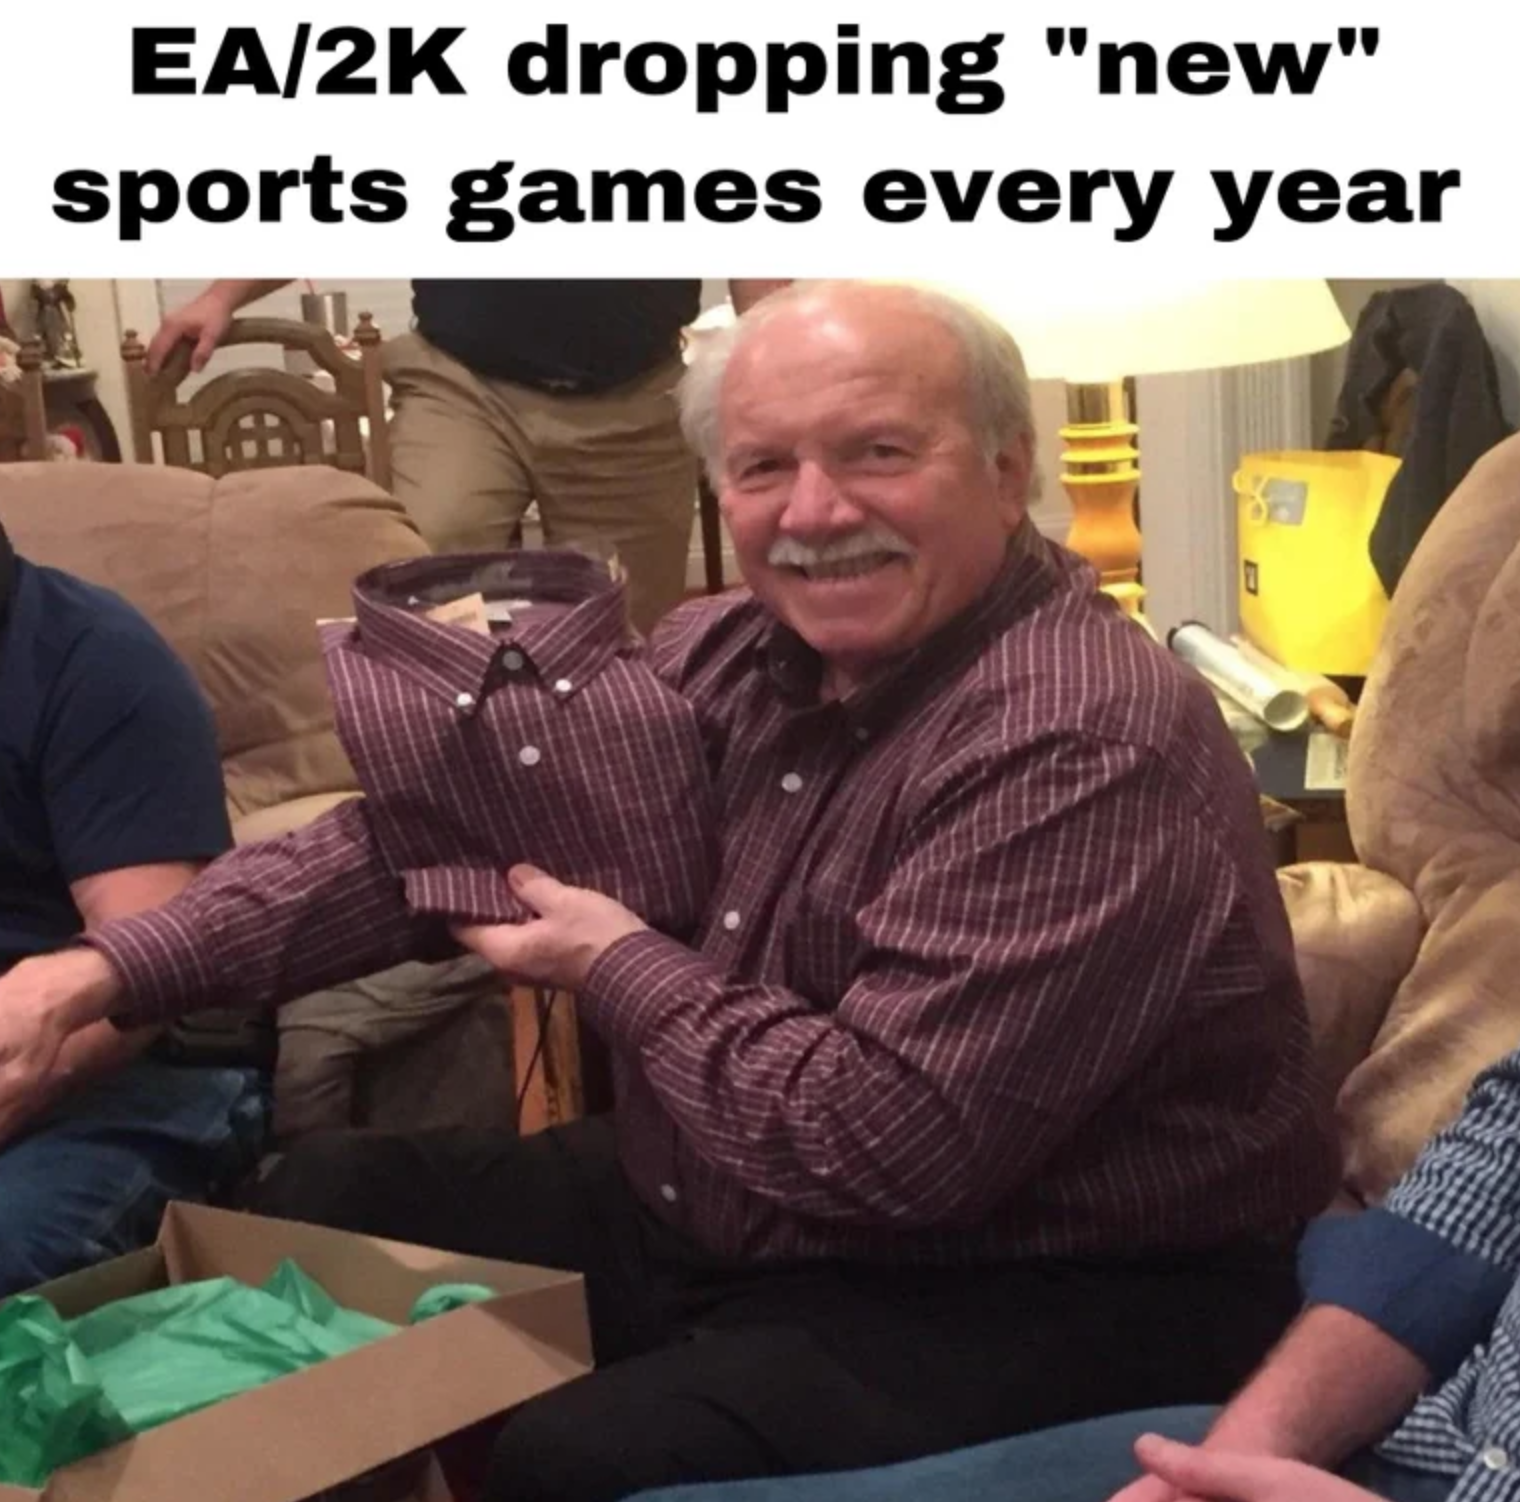 funny gaming memes - fifa 21 meme - Ea2K dropping "new" sports games every year